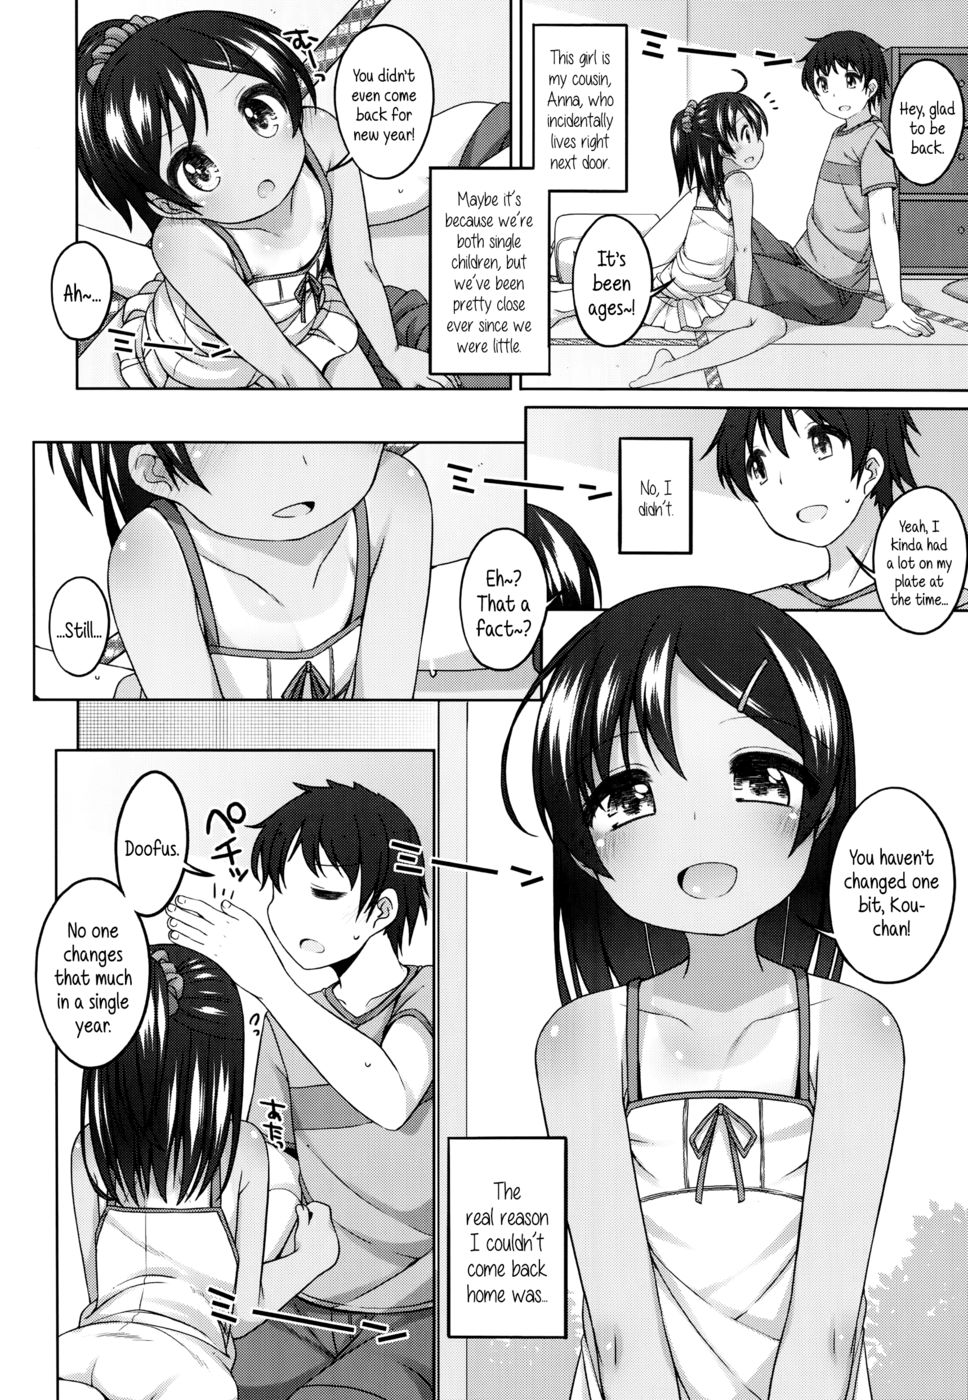 Hentai Manga Comic-That Thing From a Year Ago-Read-2